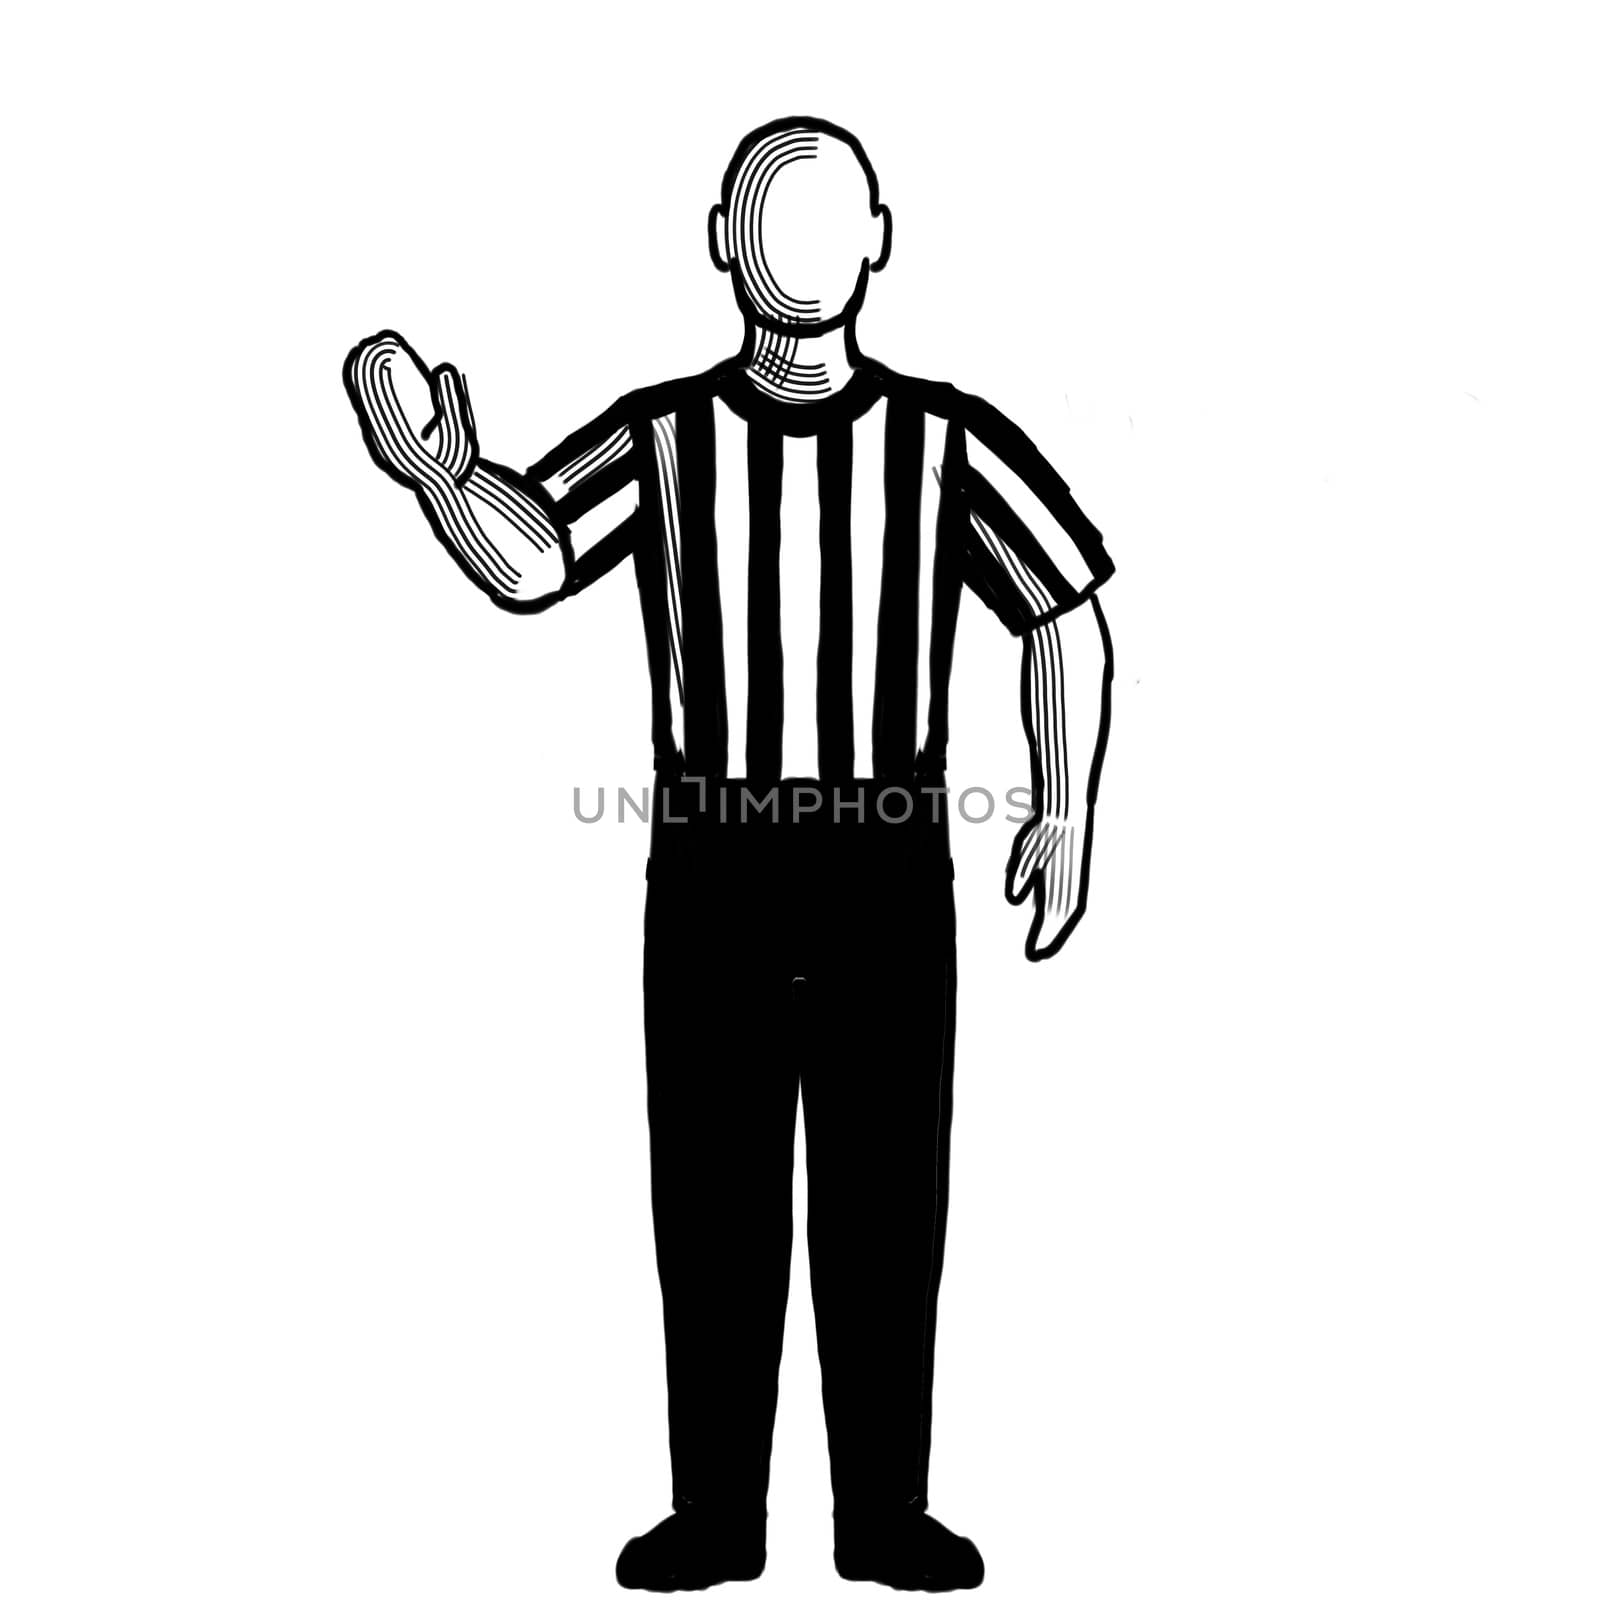 Black and white illustration of a basketball referee or official with hand signal showing 5-second violation viewed from front on isolated background done retro style.